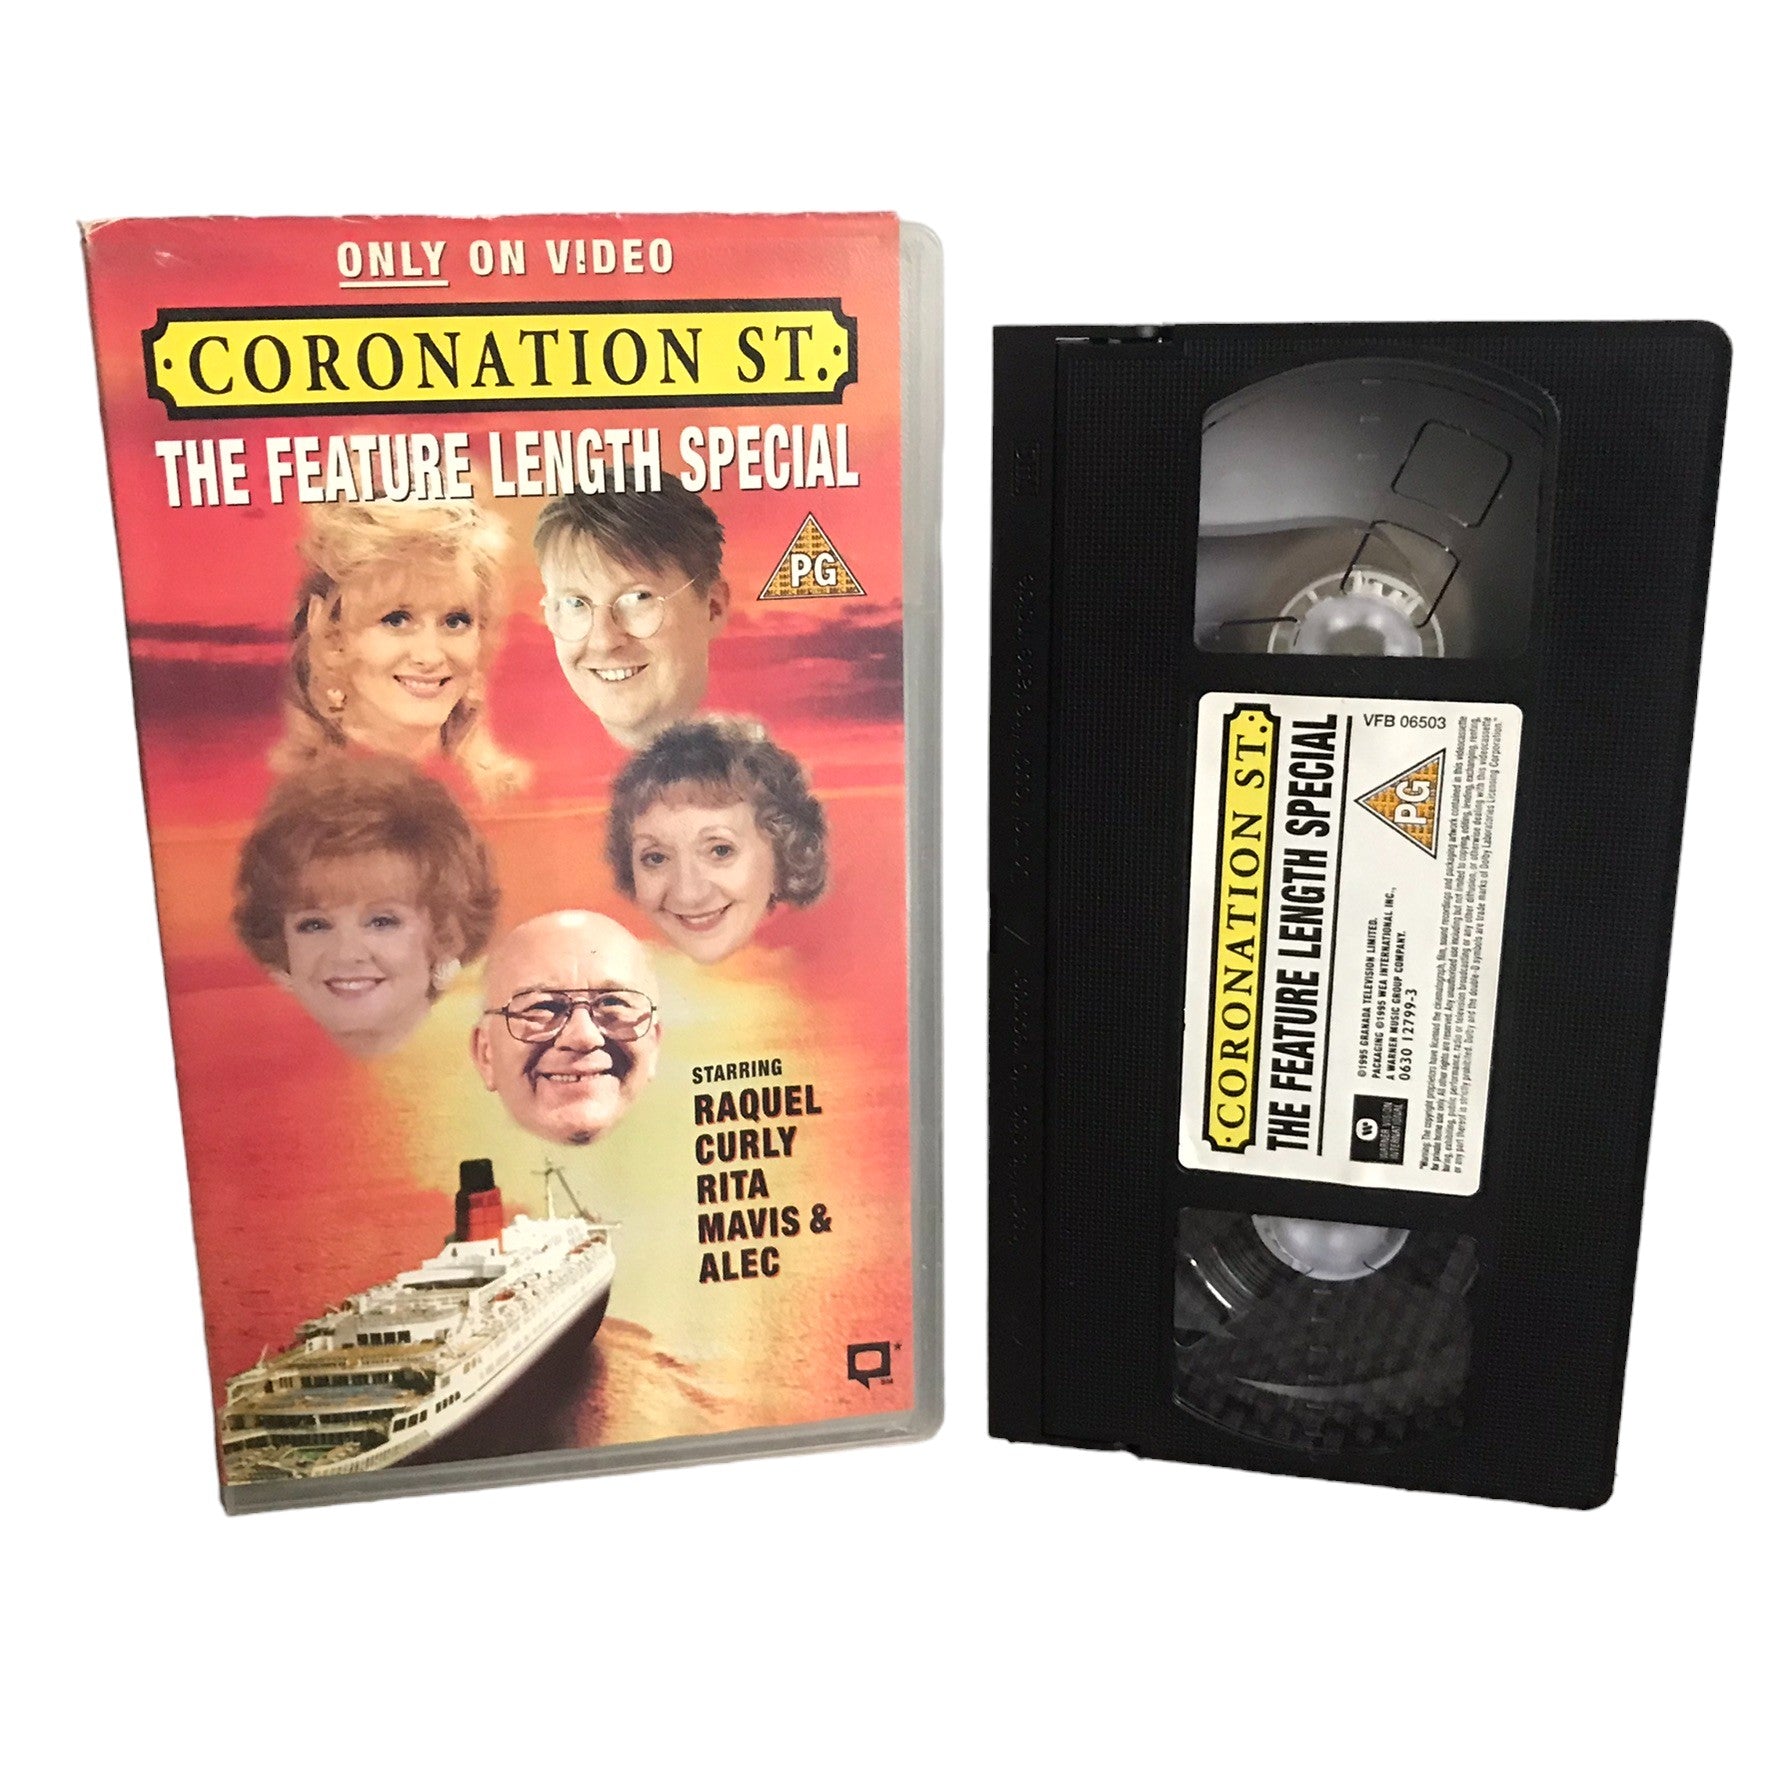 Coronation St. The Feature Length Special - Thelma Barlow - Warner Vision International - Comedy - Pal - VHS-